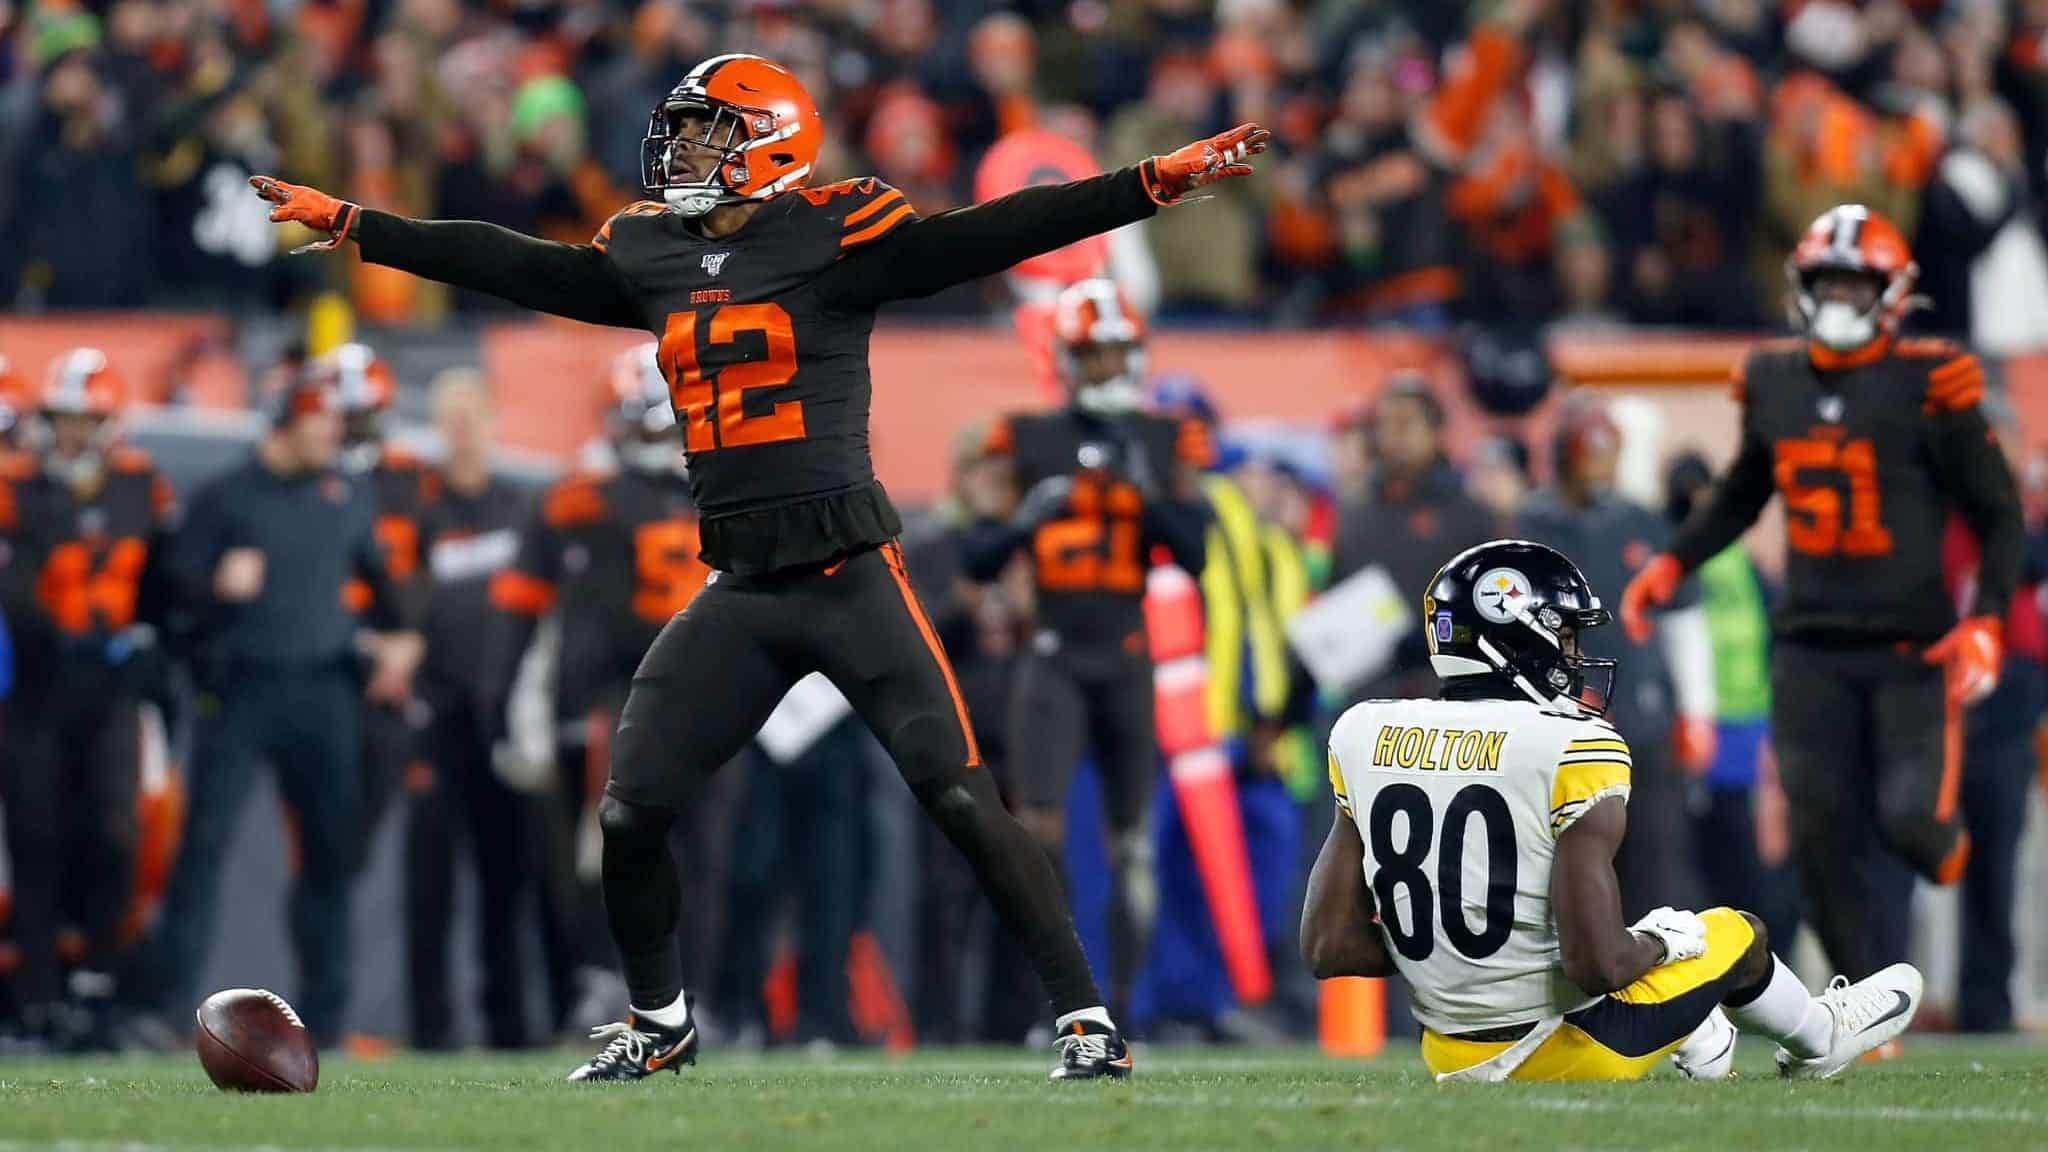 CLEVELAND, OH - NOVEMBER 14: Morgan Burnett #42 of the Cleveland Browns celebrates after breaking up a pass intended for Johnny Holton #80 of the Pittsburgh Steelers during the second quarter at FirstEnergy Stadium on November 14, 2019 in Cleveland, Ohio.